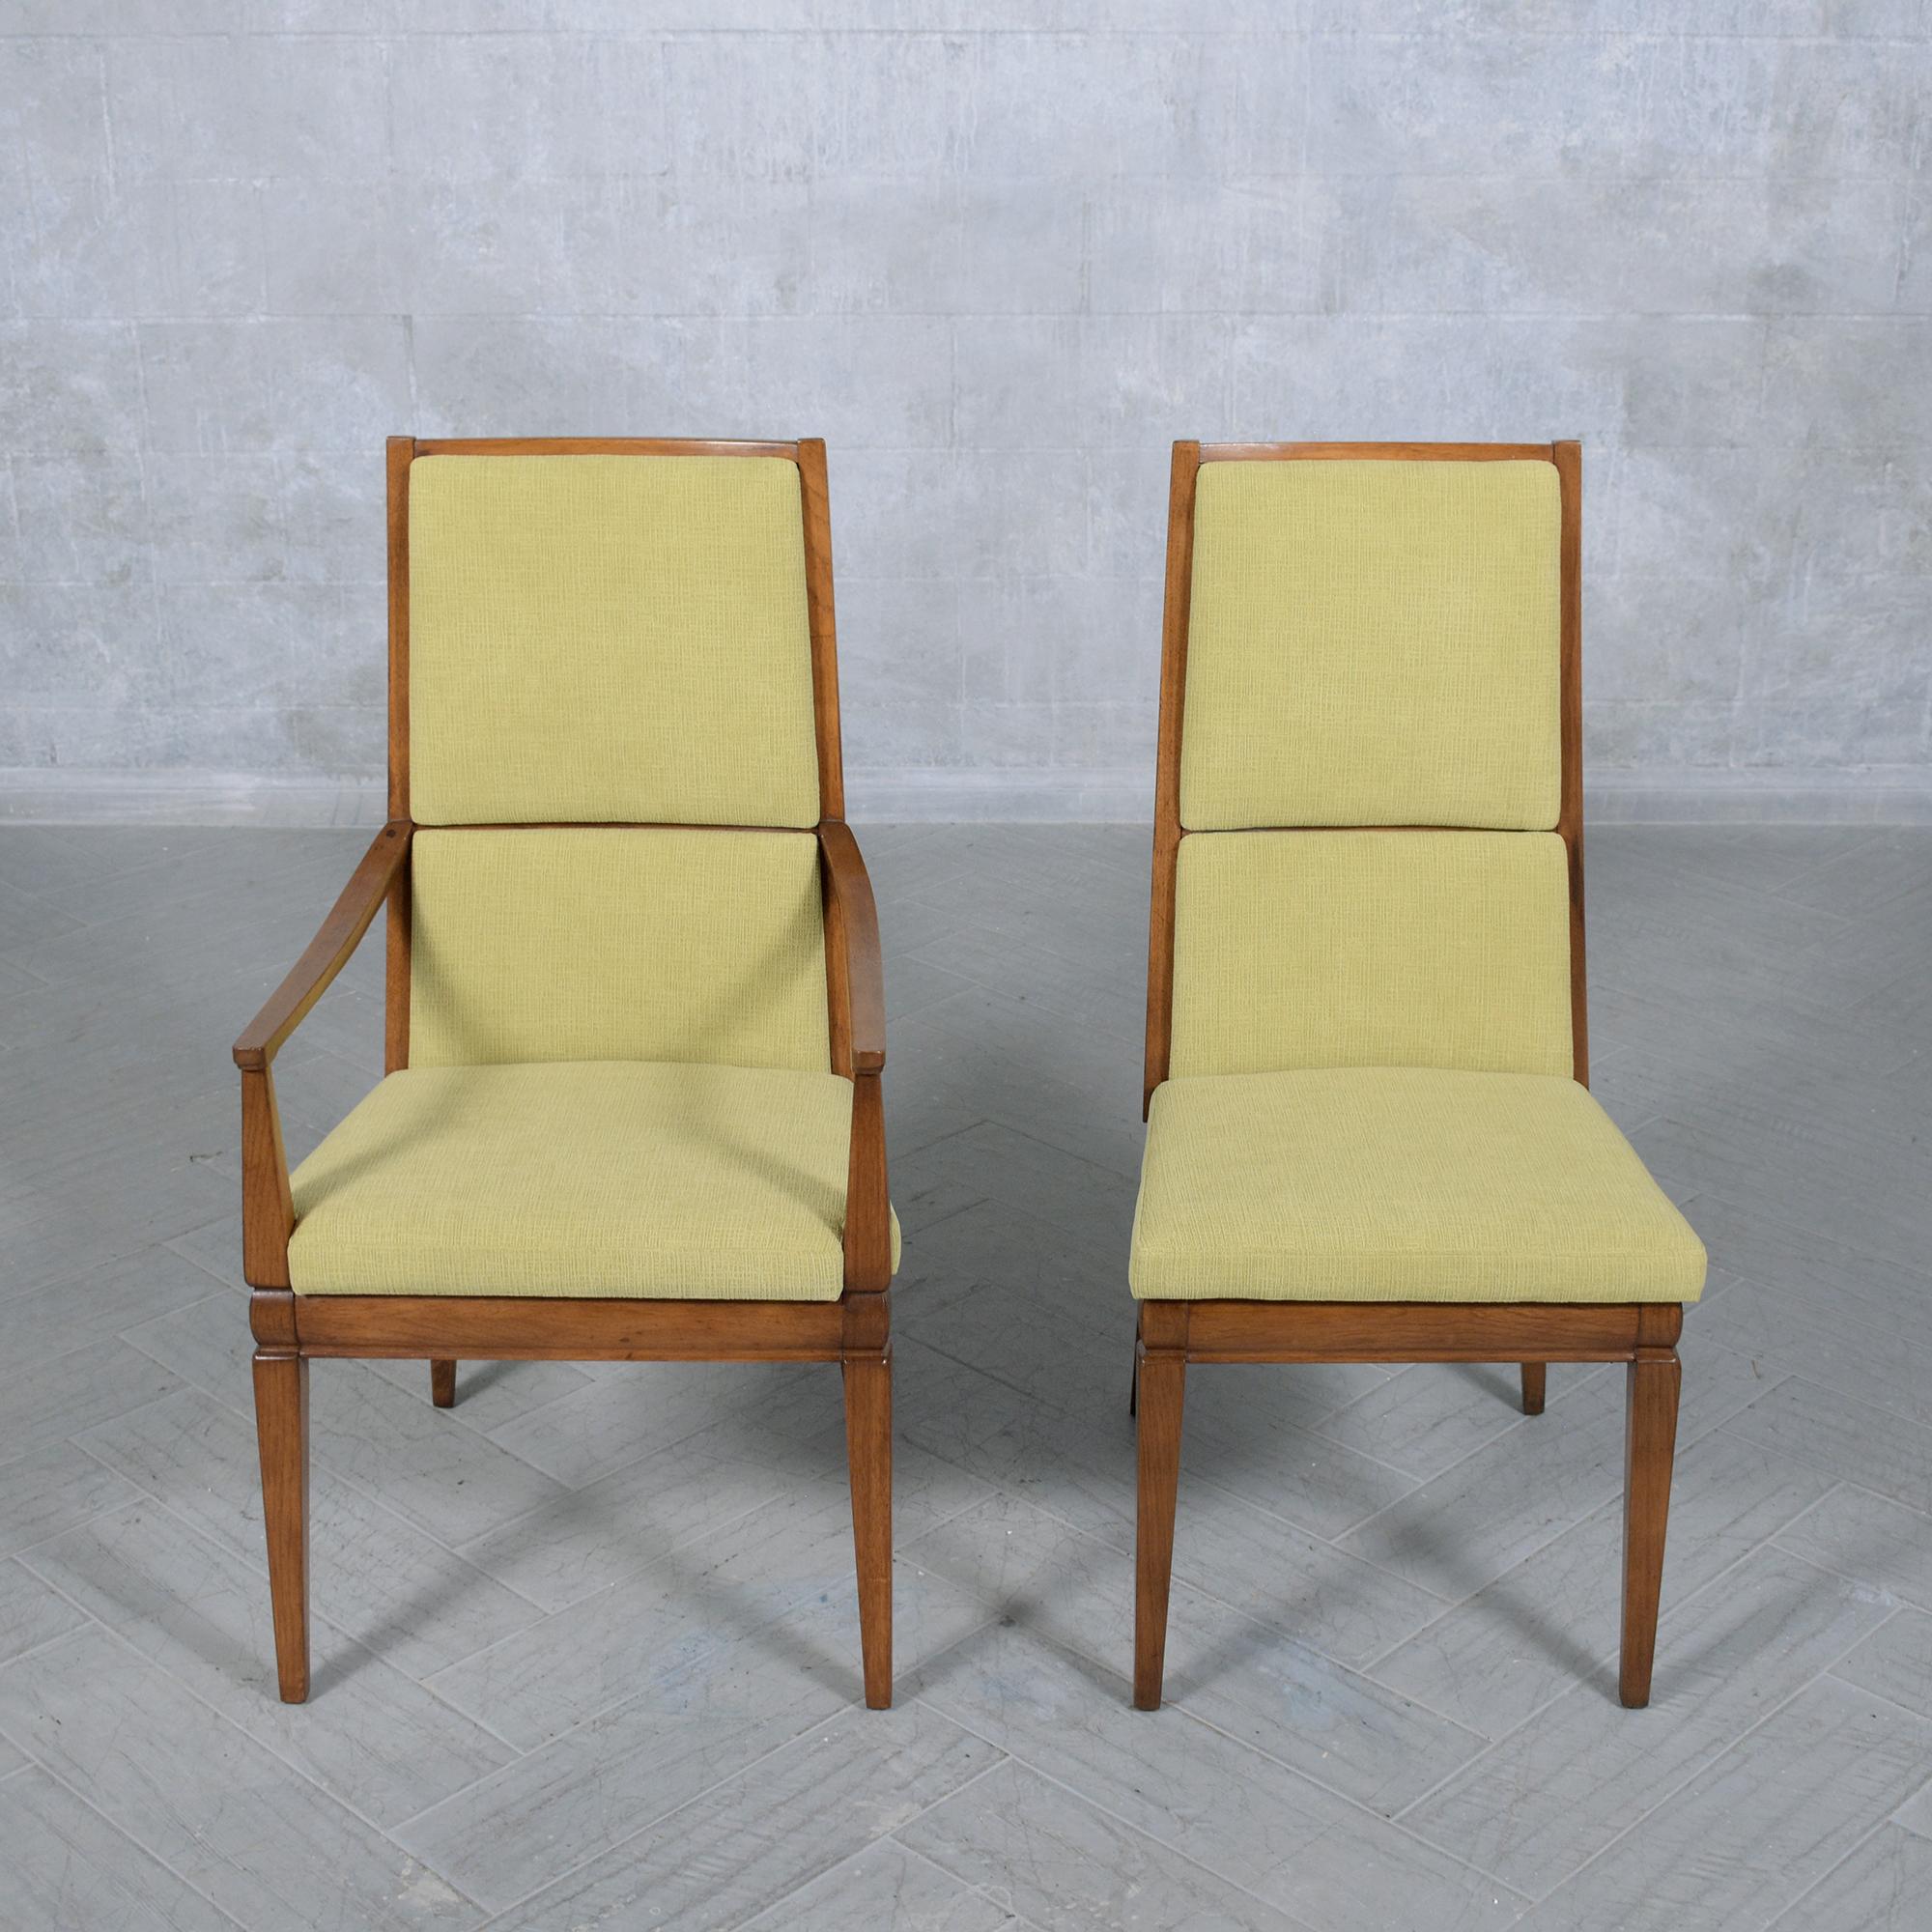 American 1960s Vintage Modern Dining Chair Set in Walnut with Green Chenille Fabric